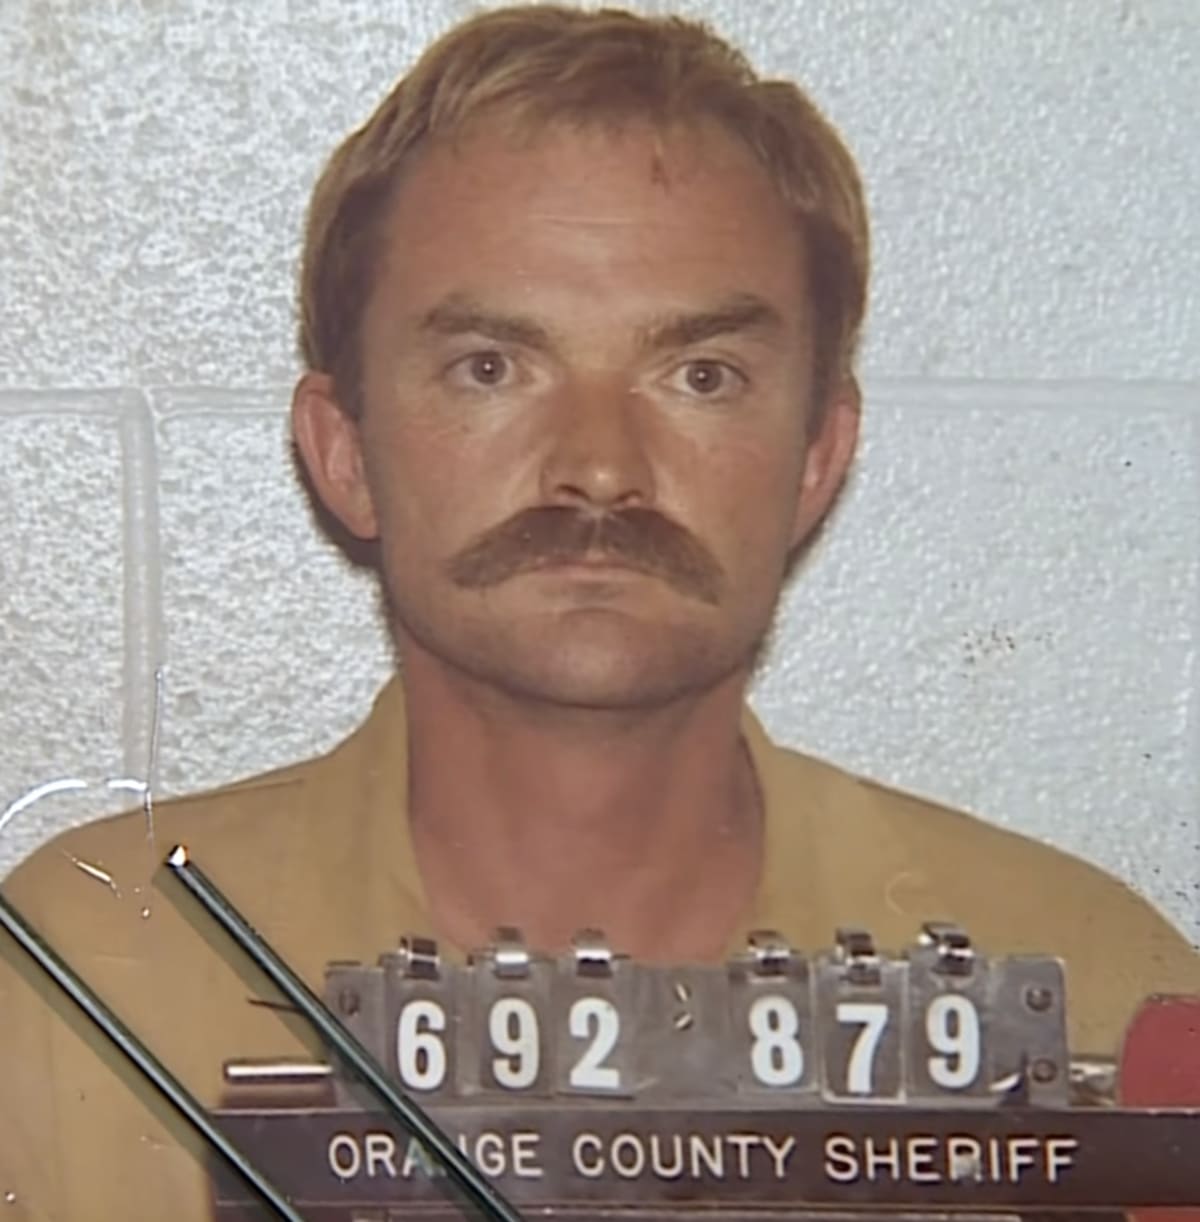 Randy Kraft was arrested in 1983 after being pulled over with a dead body in his car (Orange County Sheriff's Department)